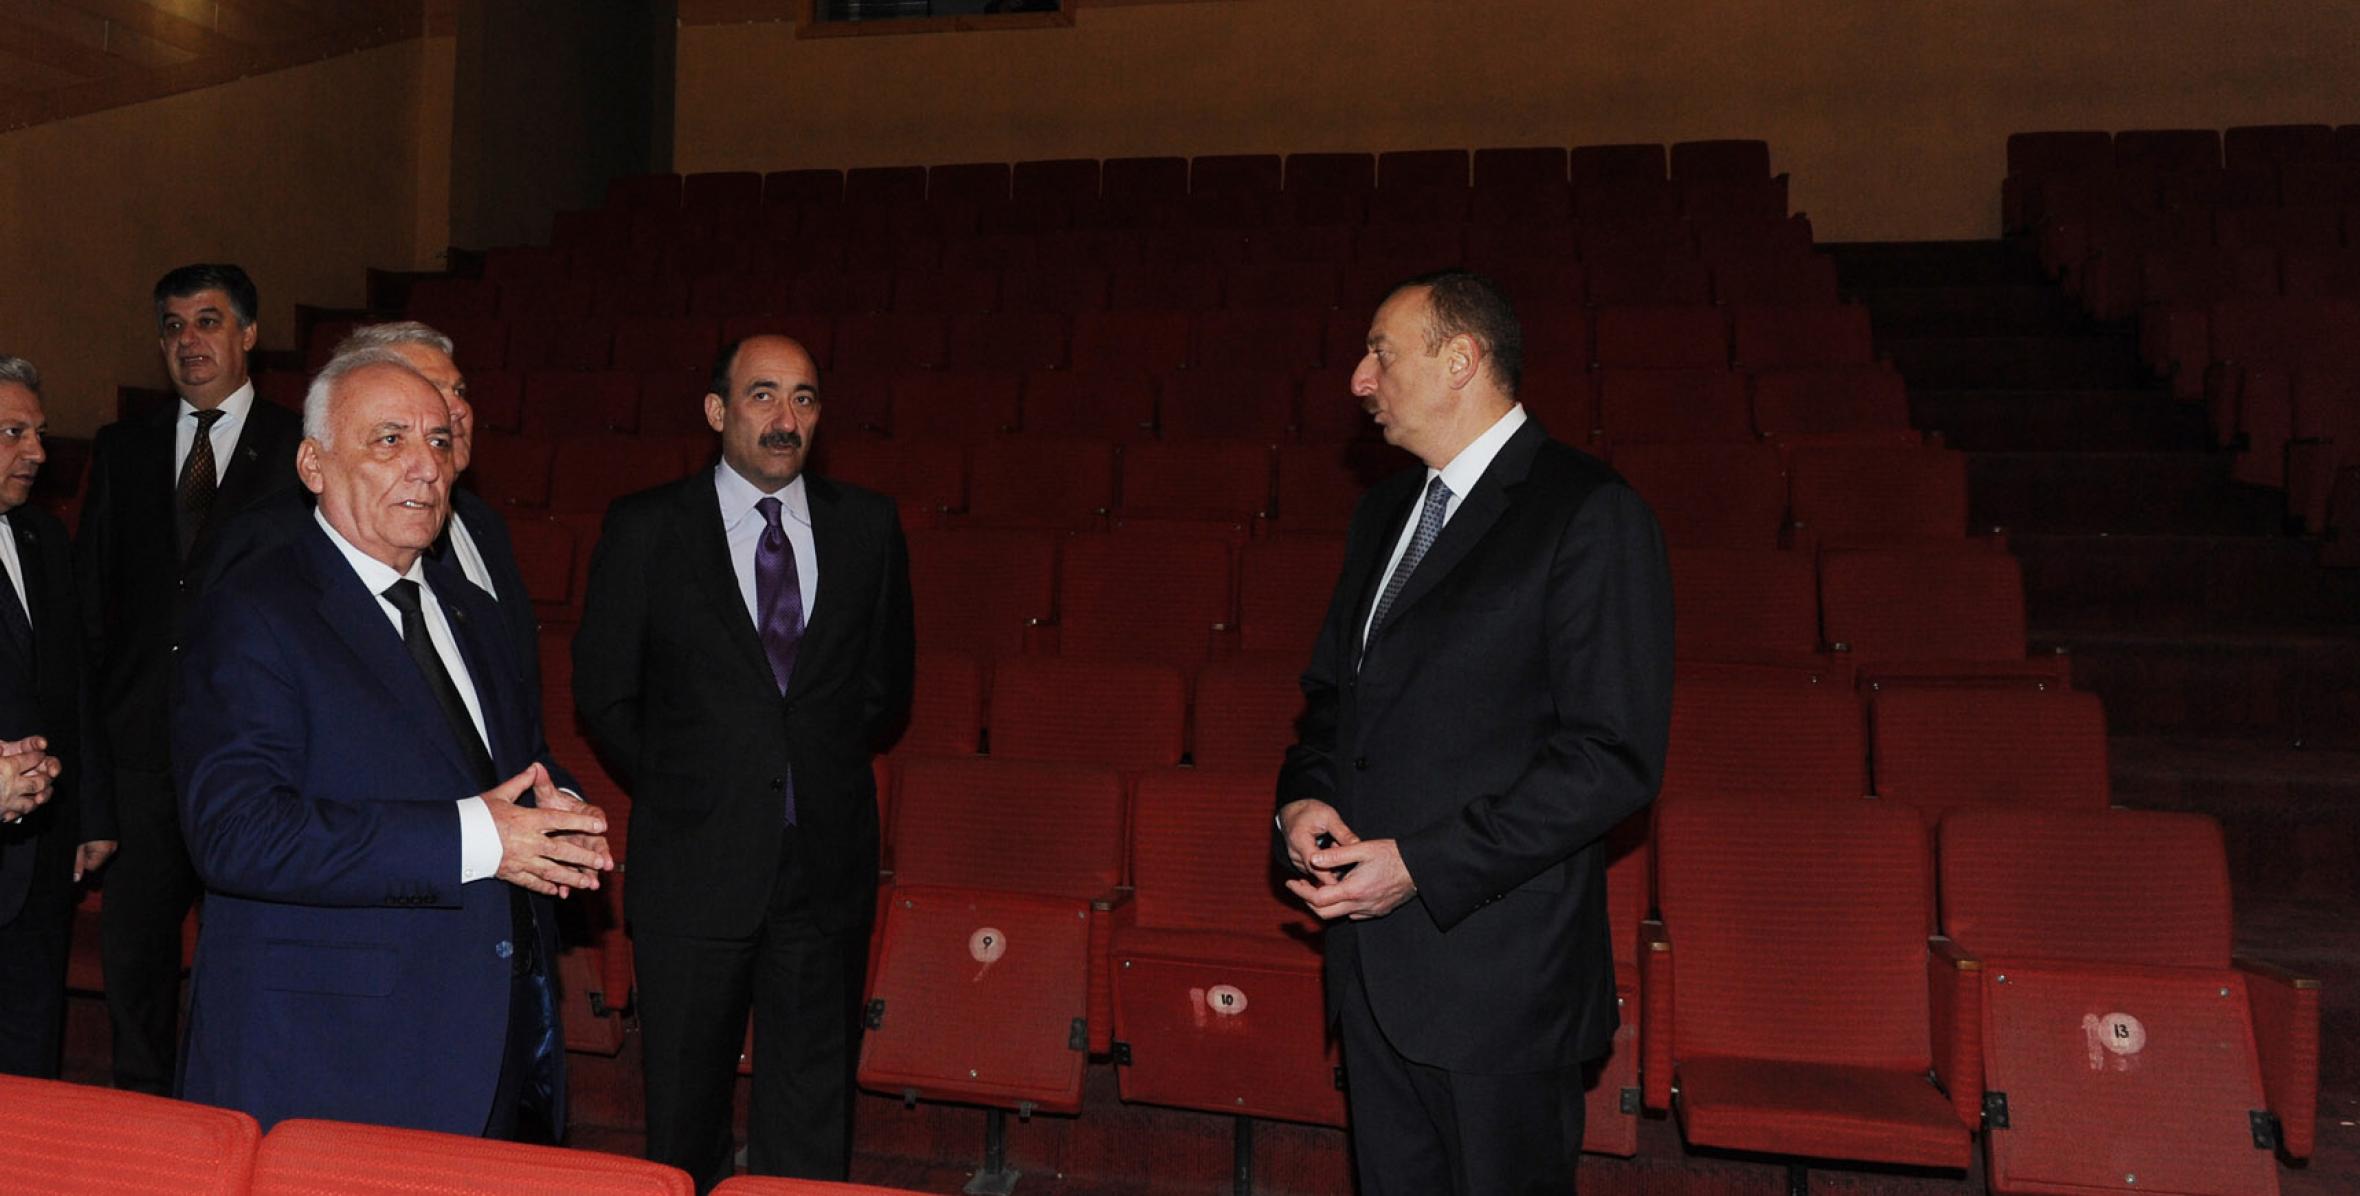 Ilham Aliyev reviewed the State Drama Theater named after Sabit Rahman in Shaki